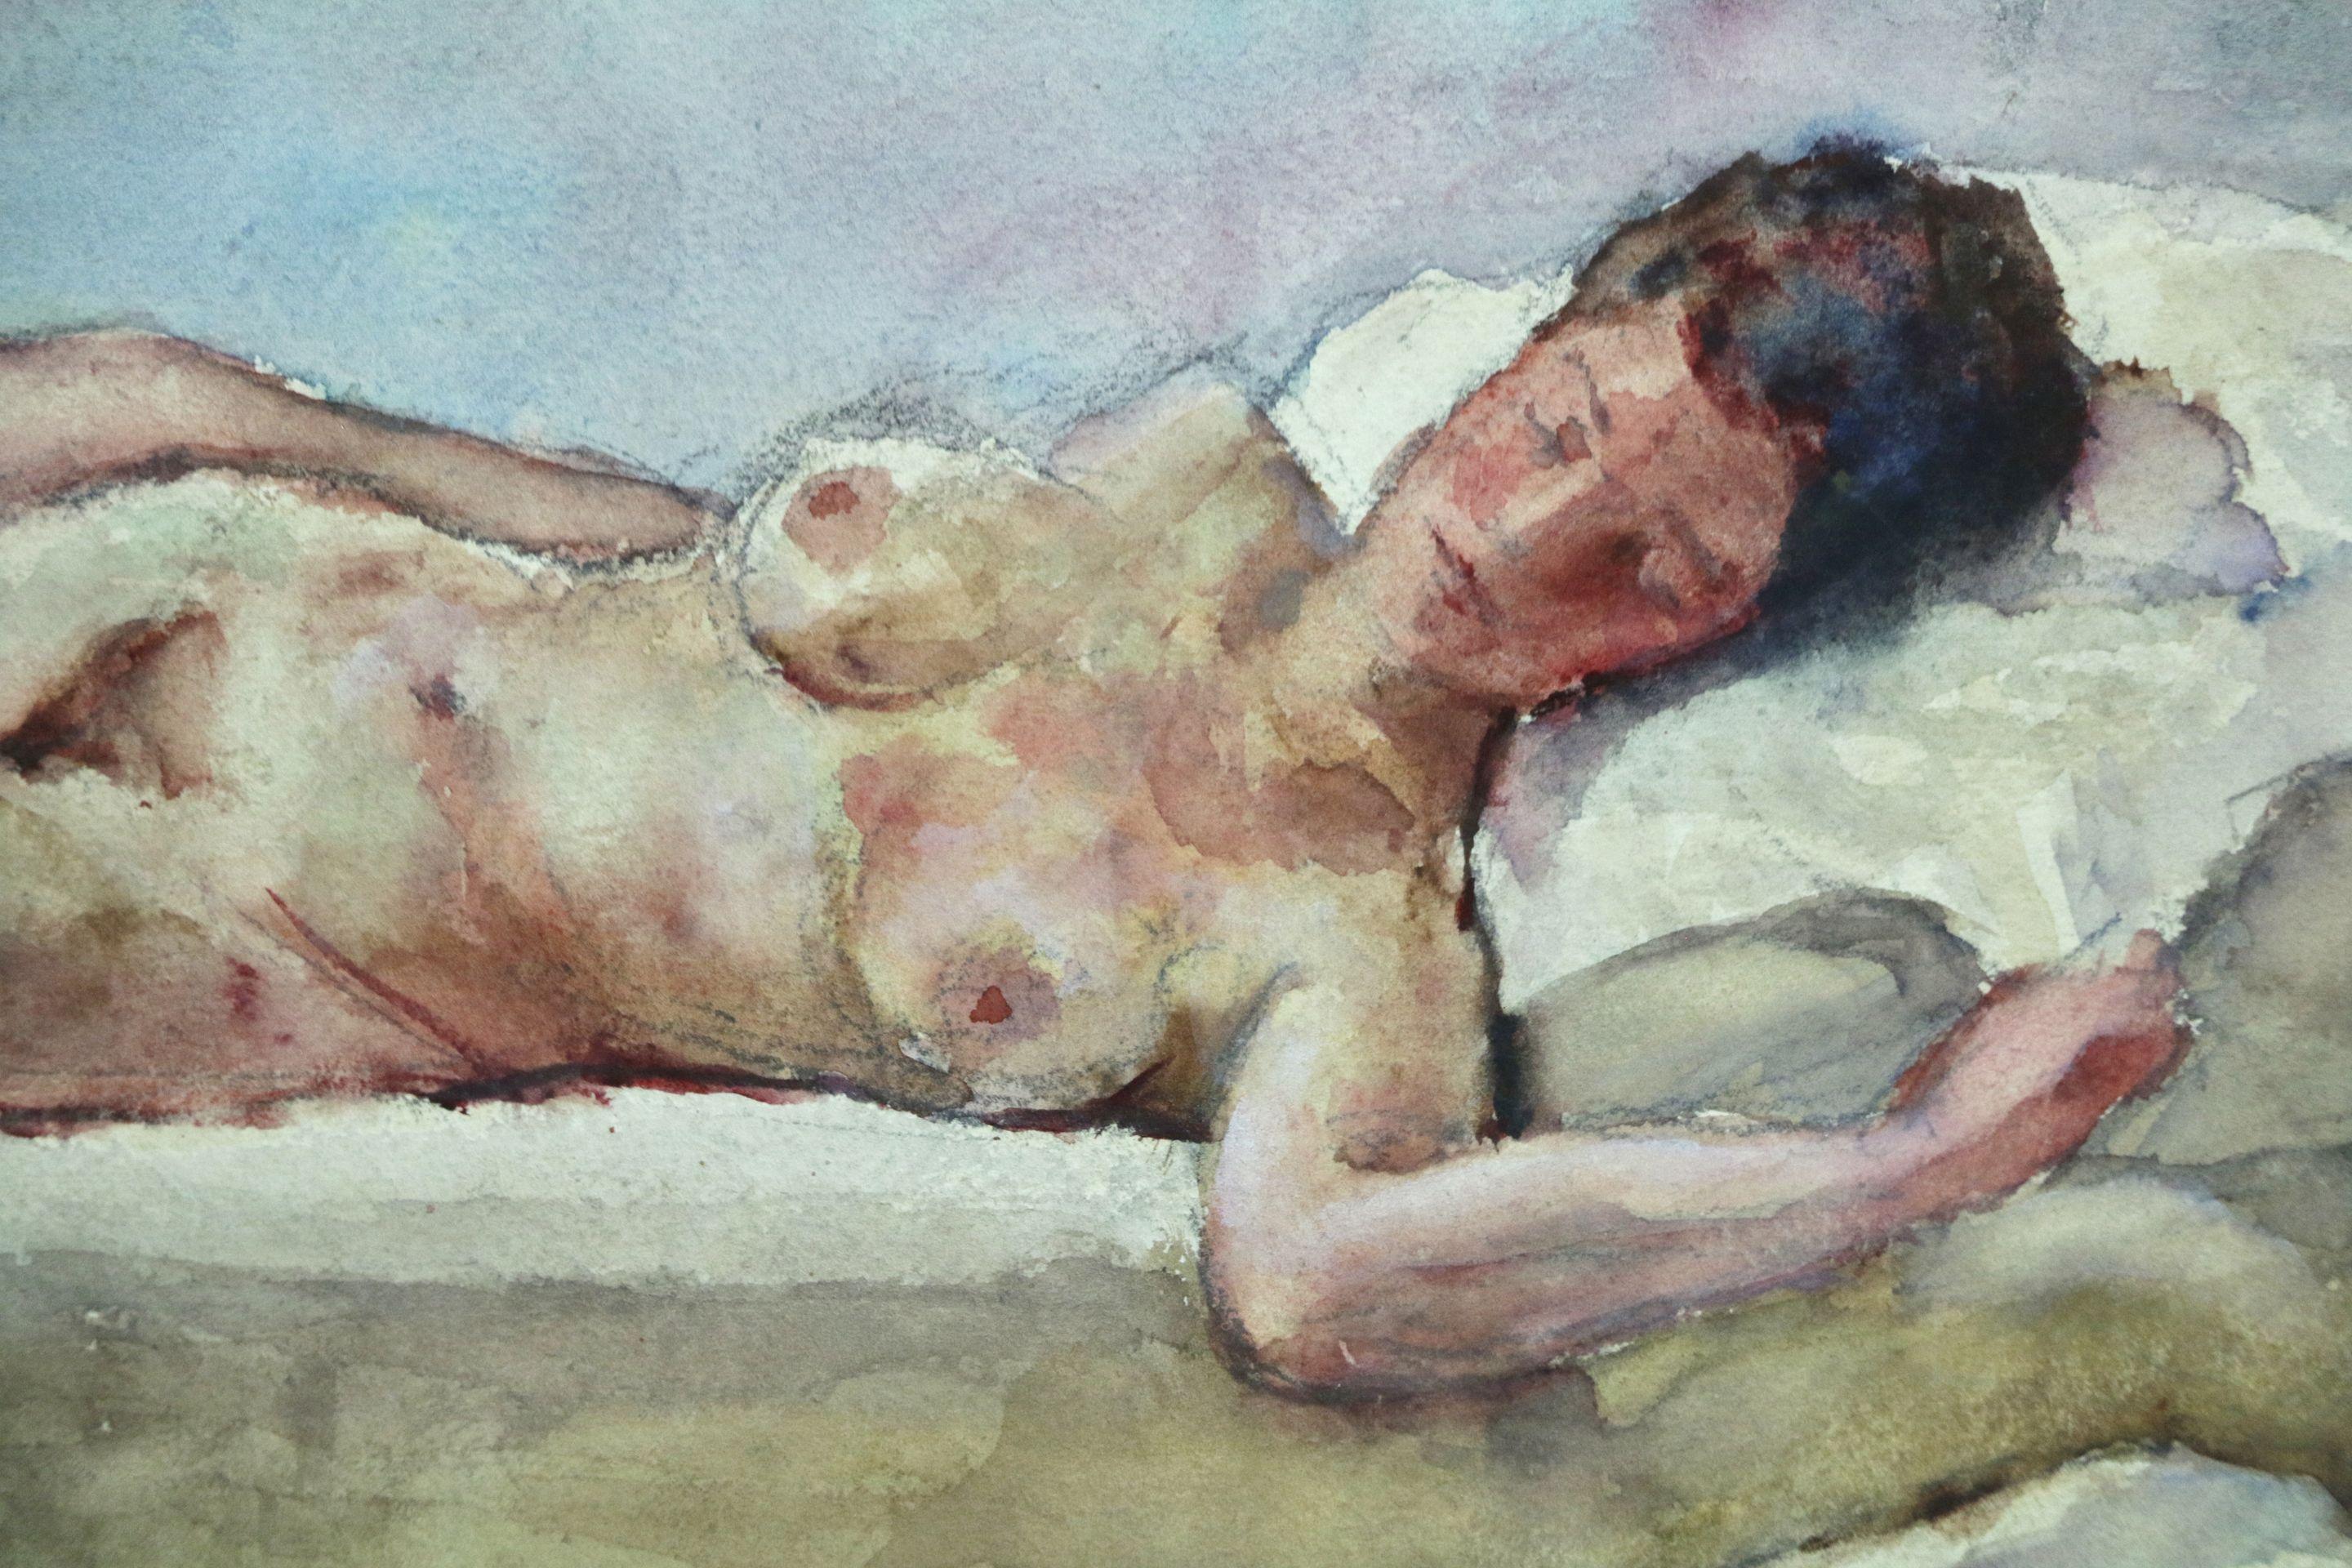 A beautifully coloured watercolour on paper circa 1900 by Kees van Dongen of a nude reclining on a bed. Signed lower right. Framed dimensions are 17 inches high by 25 inches wide.

Kees van Dongen's father first placed him in a school of industrial